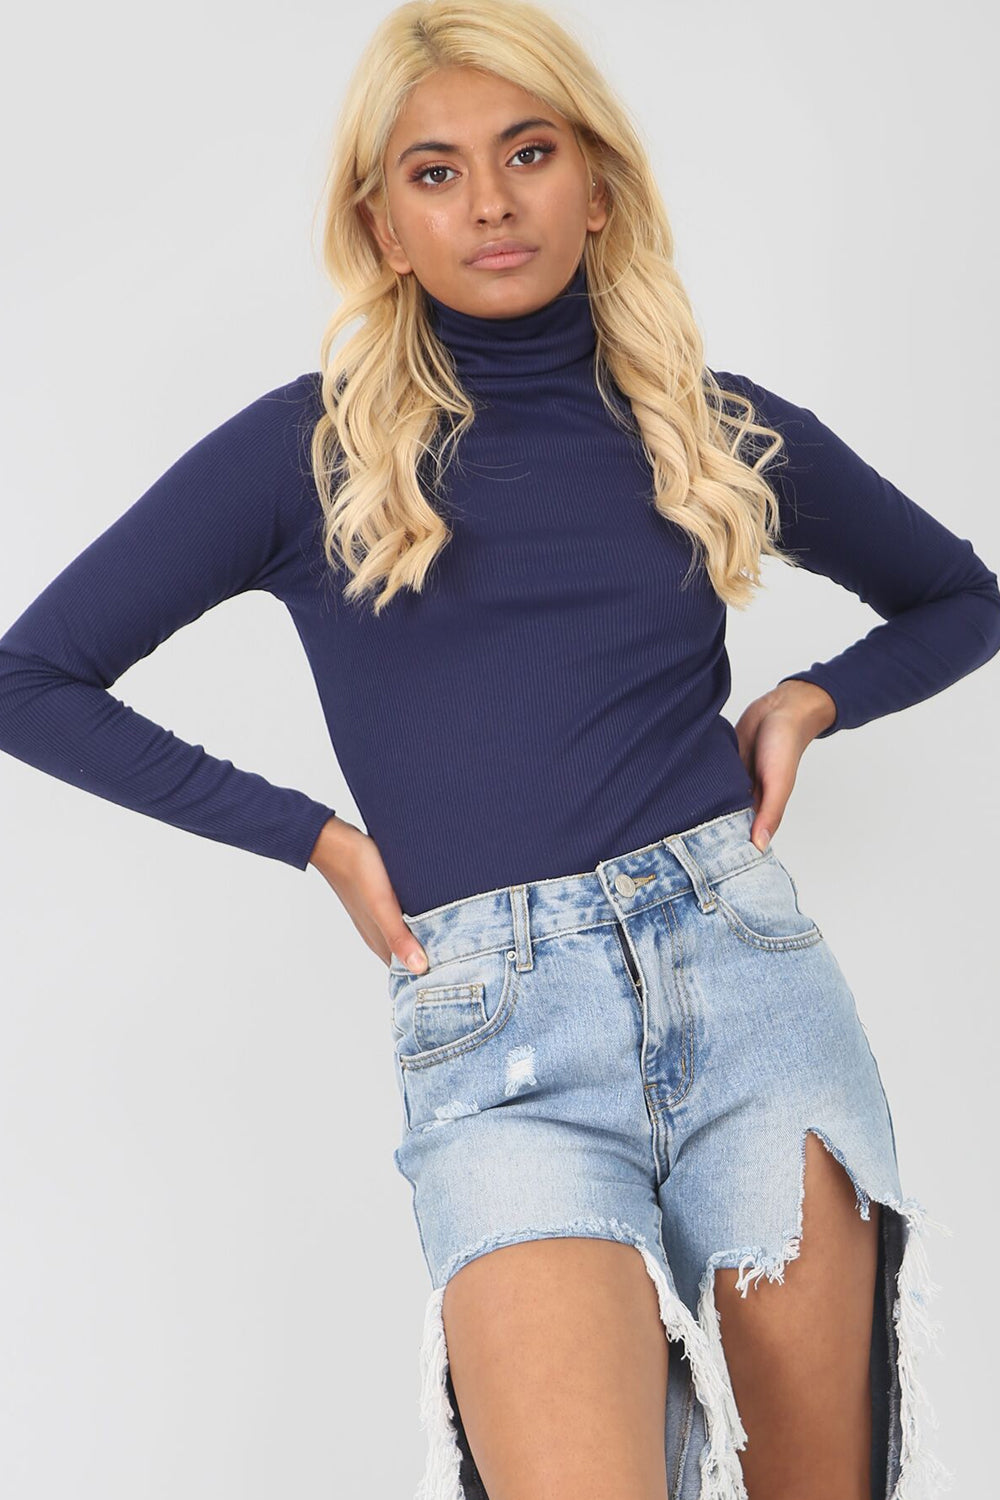 Cammie Long Sleeve Funnel Neck Knitted Top - bejealous-com